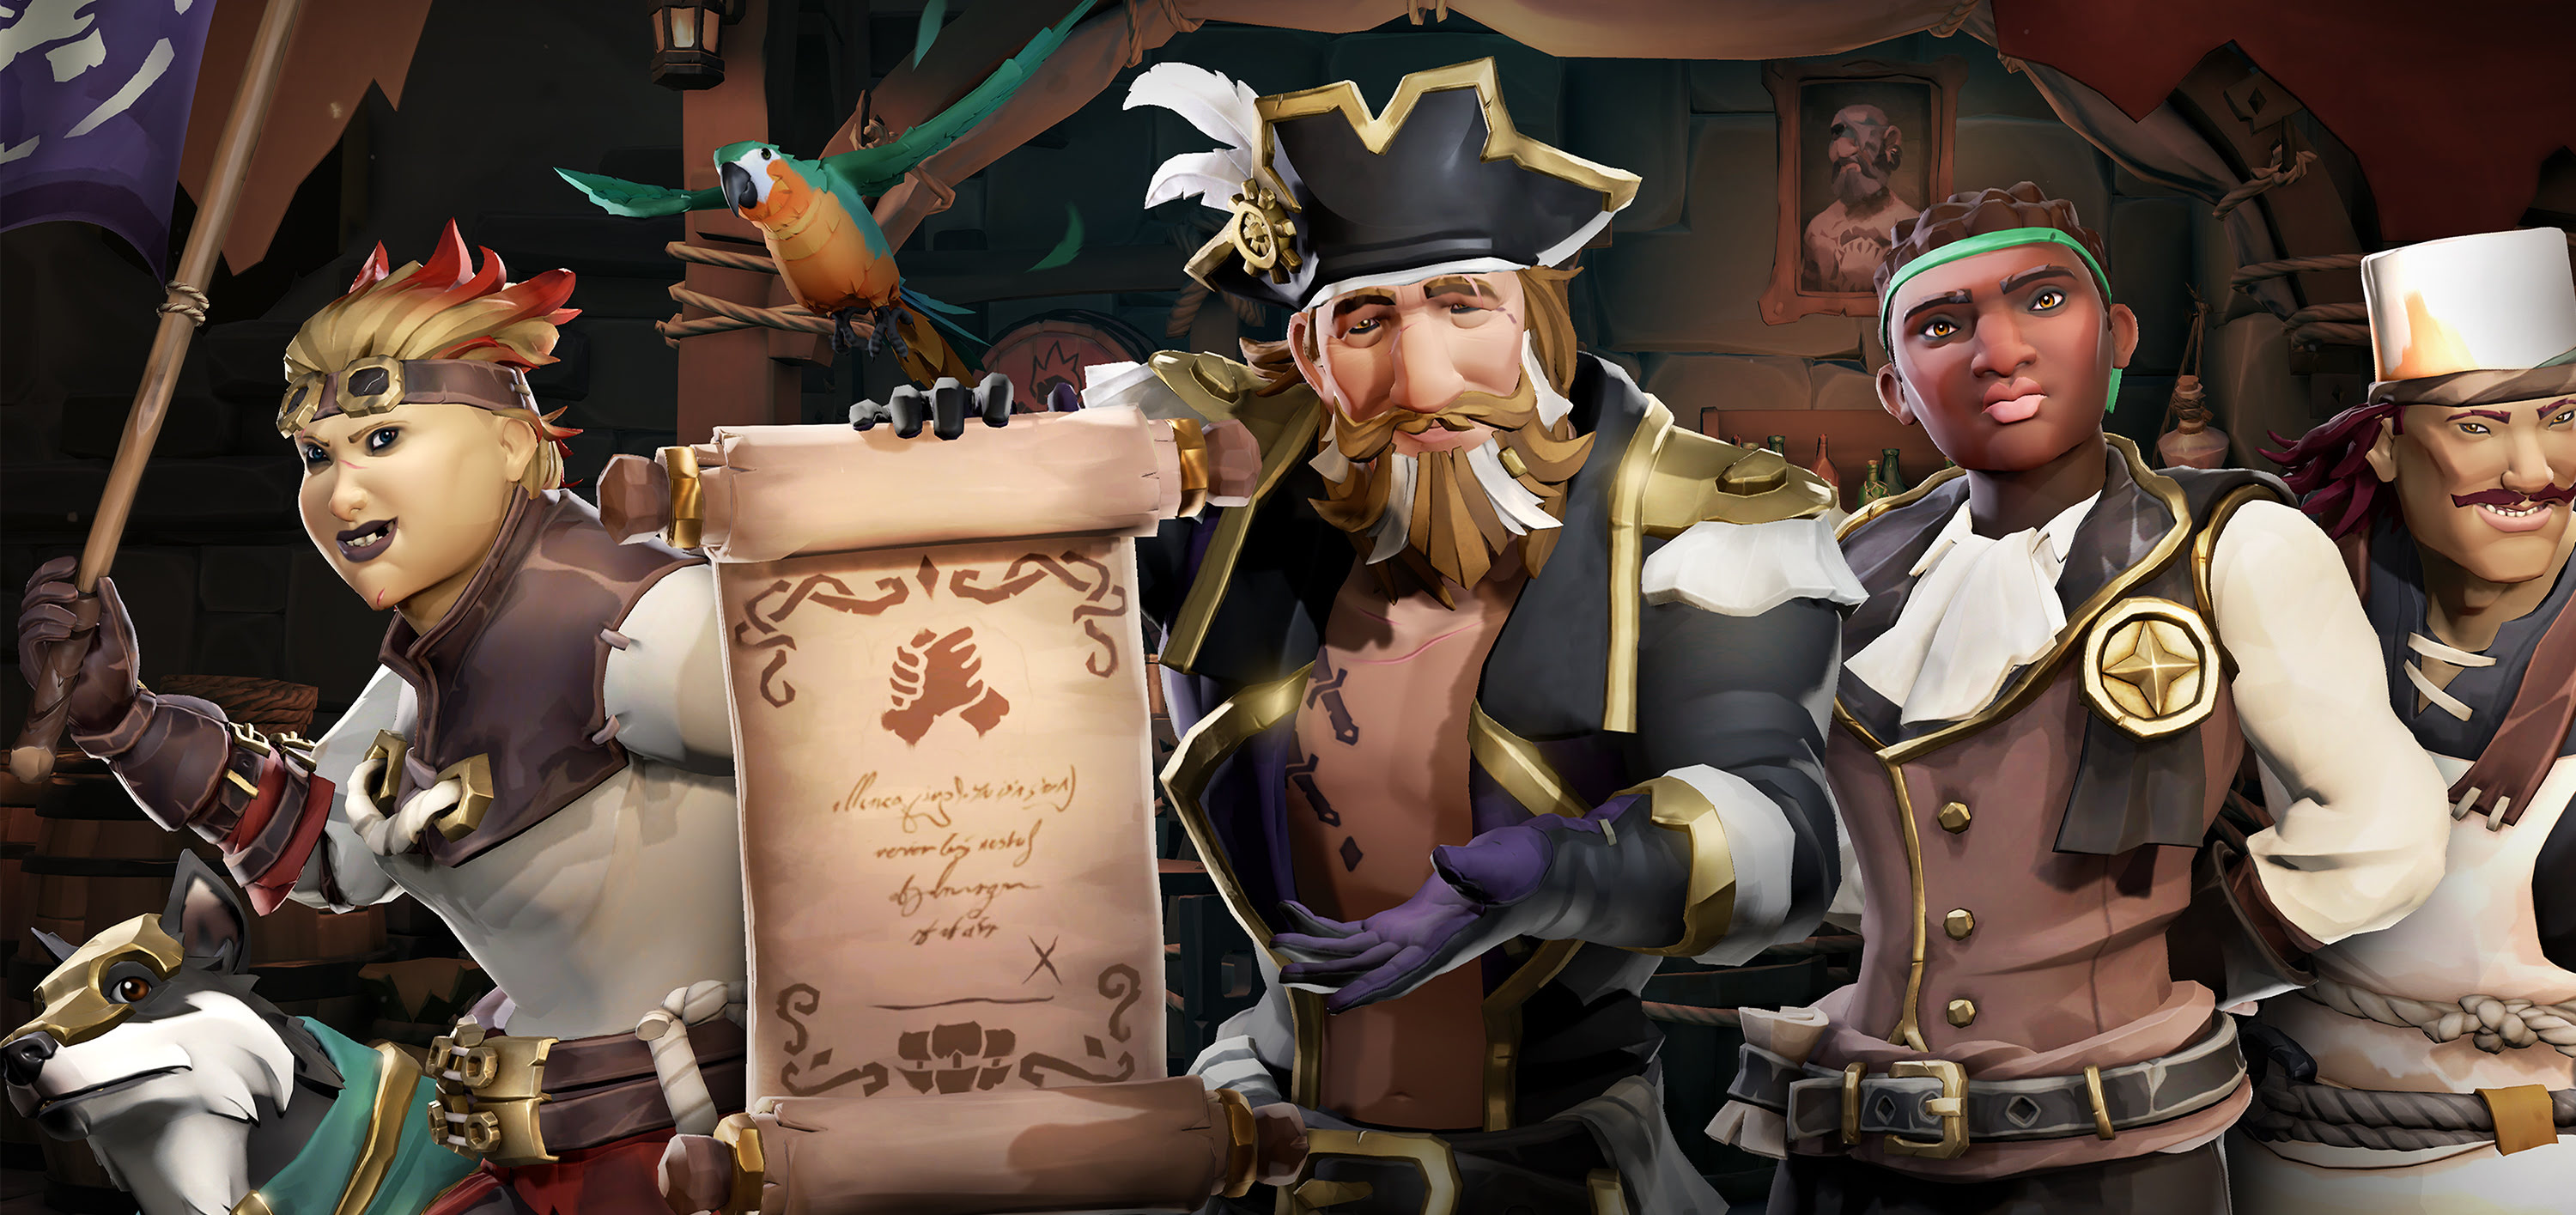 Sea of Thieves adding cats (in hats) and a new trading company in